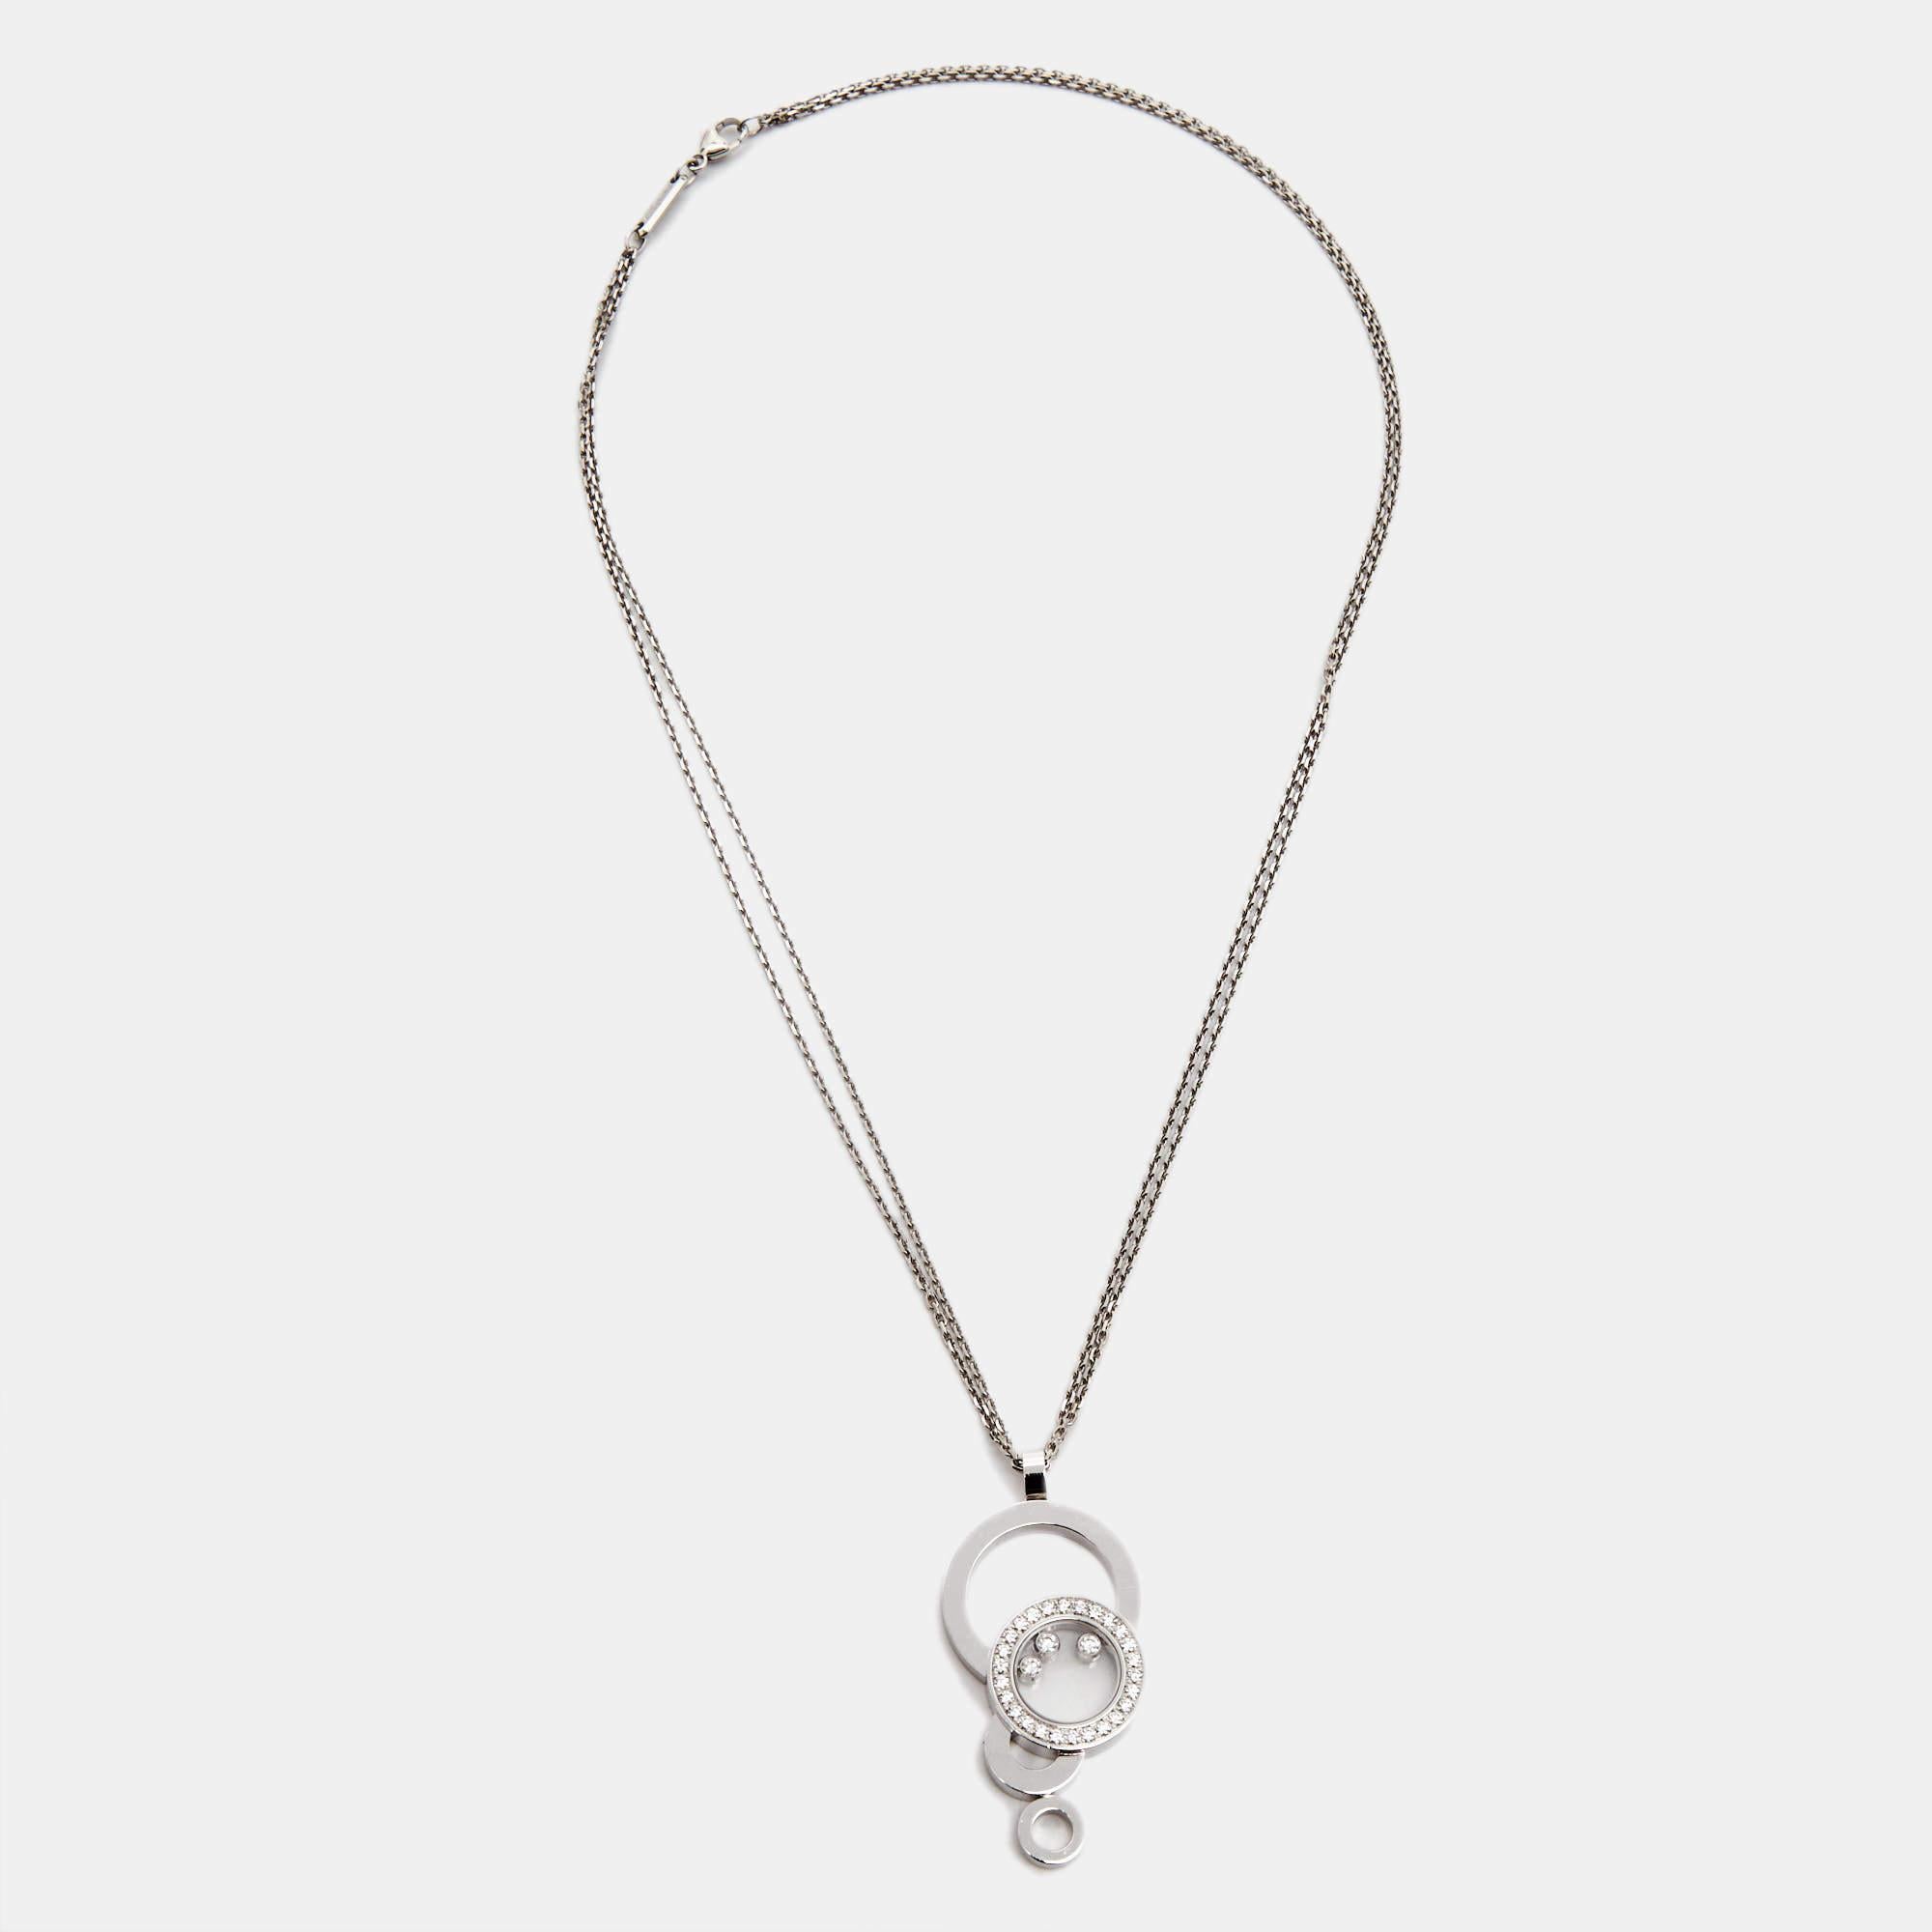 This necklace from Chopard Happy Bubbles imparts elegance through its distinctive design. It speaks of impeccable style and ultimate luxury. Flaunt your discerning fashion taste by buying this beauty today!

